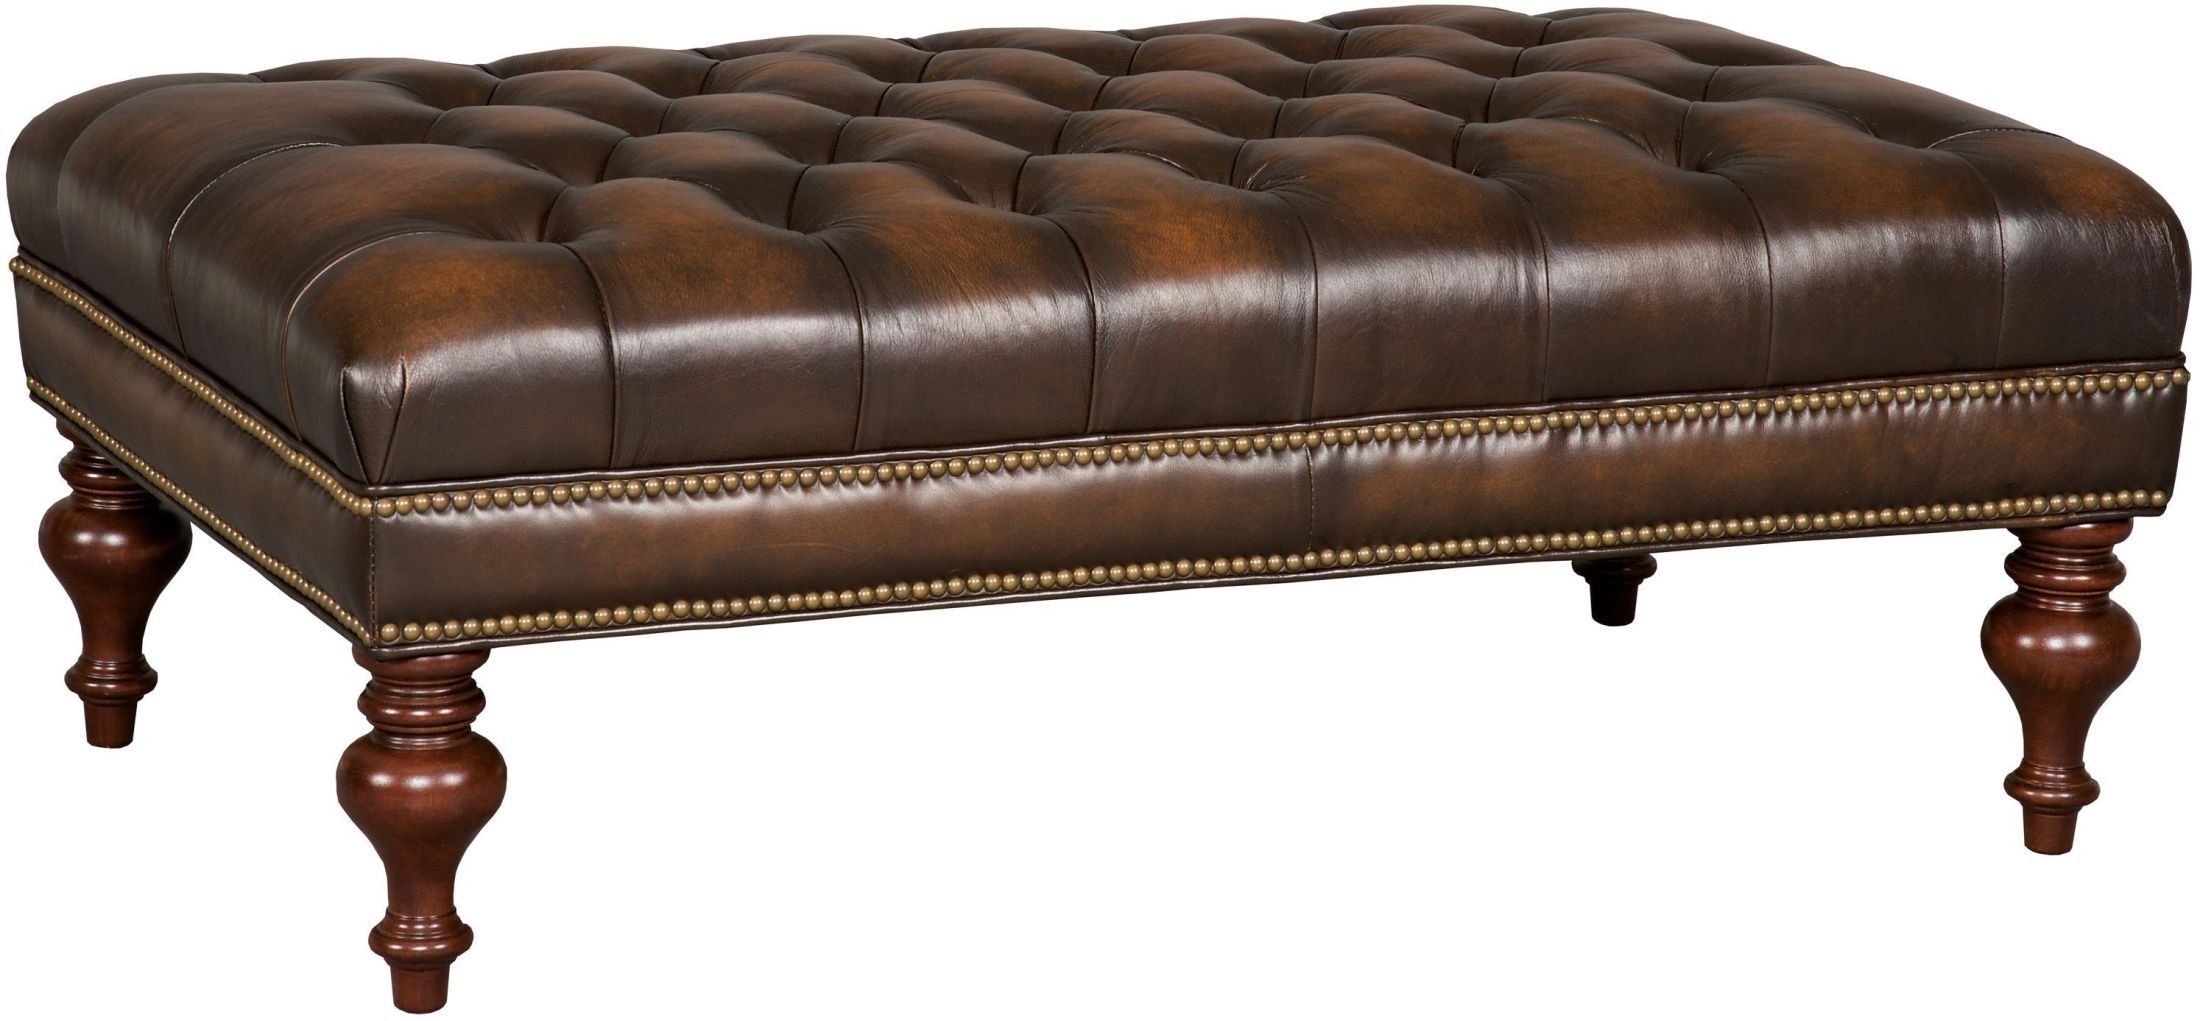 Kingley Brown Tufted Cocktail Leather Ottoman From Hooker | Coleman Intended For Tufted Fabric Cocktail Ottomans (View 14 of 20)